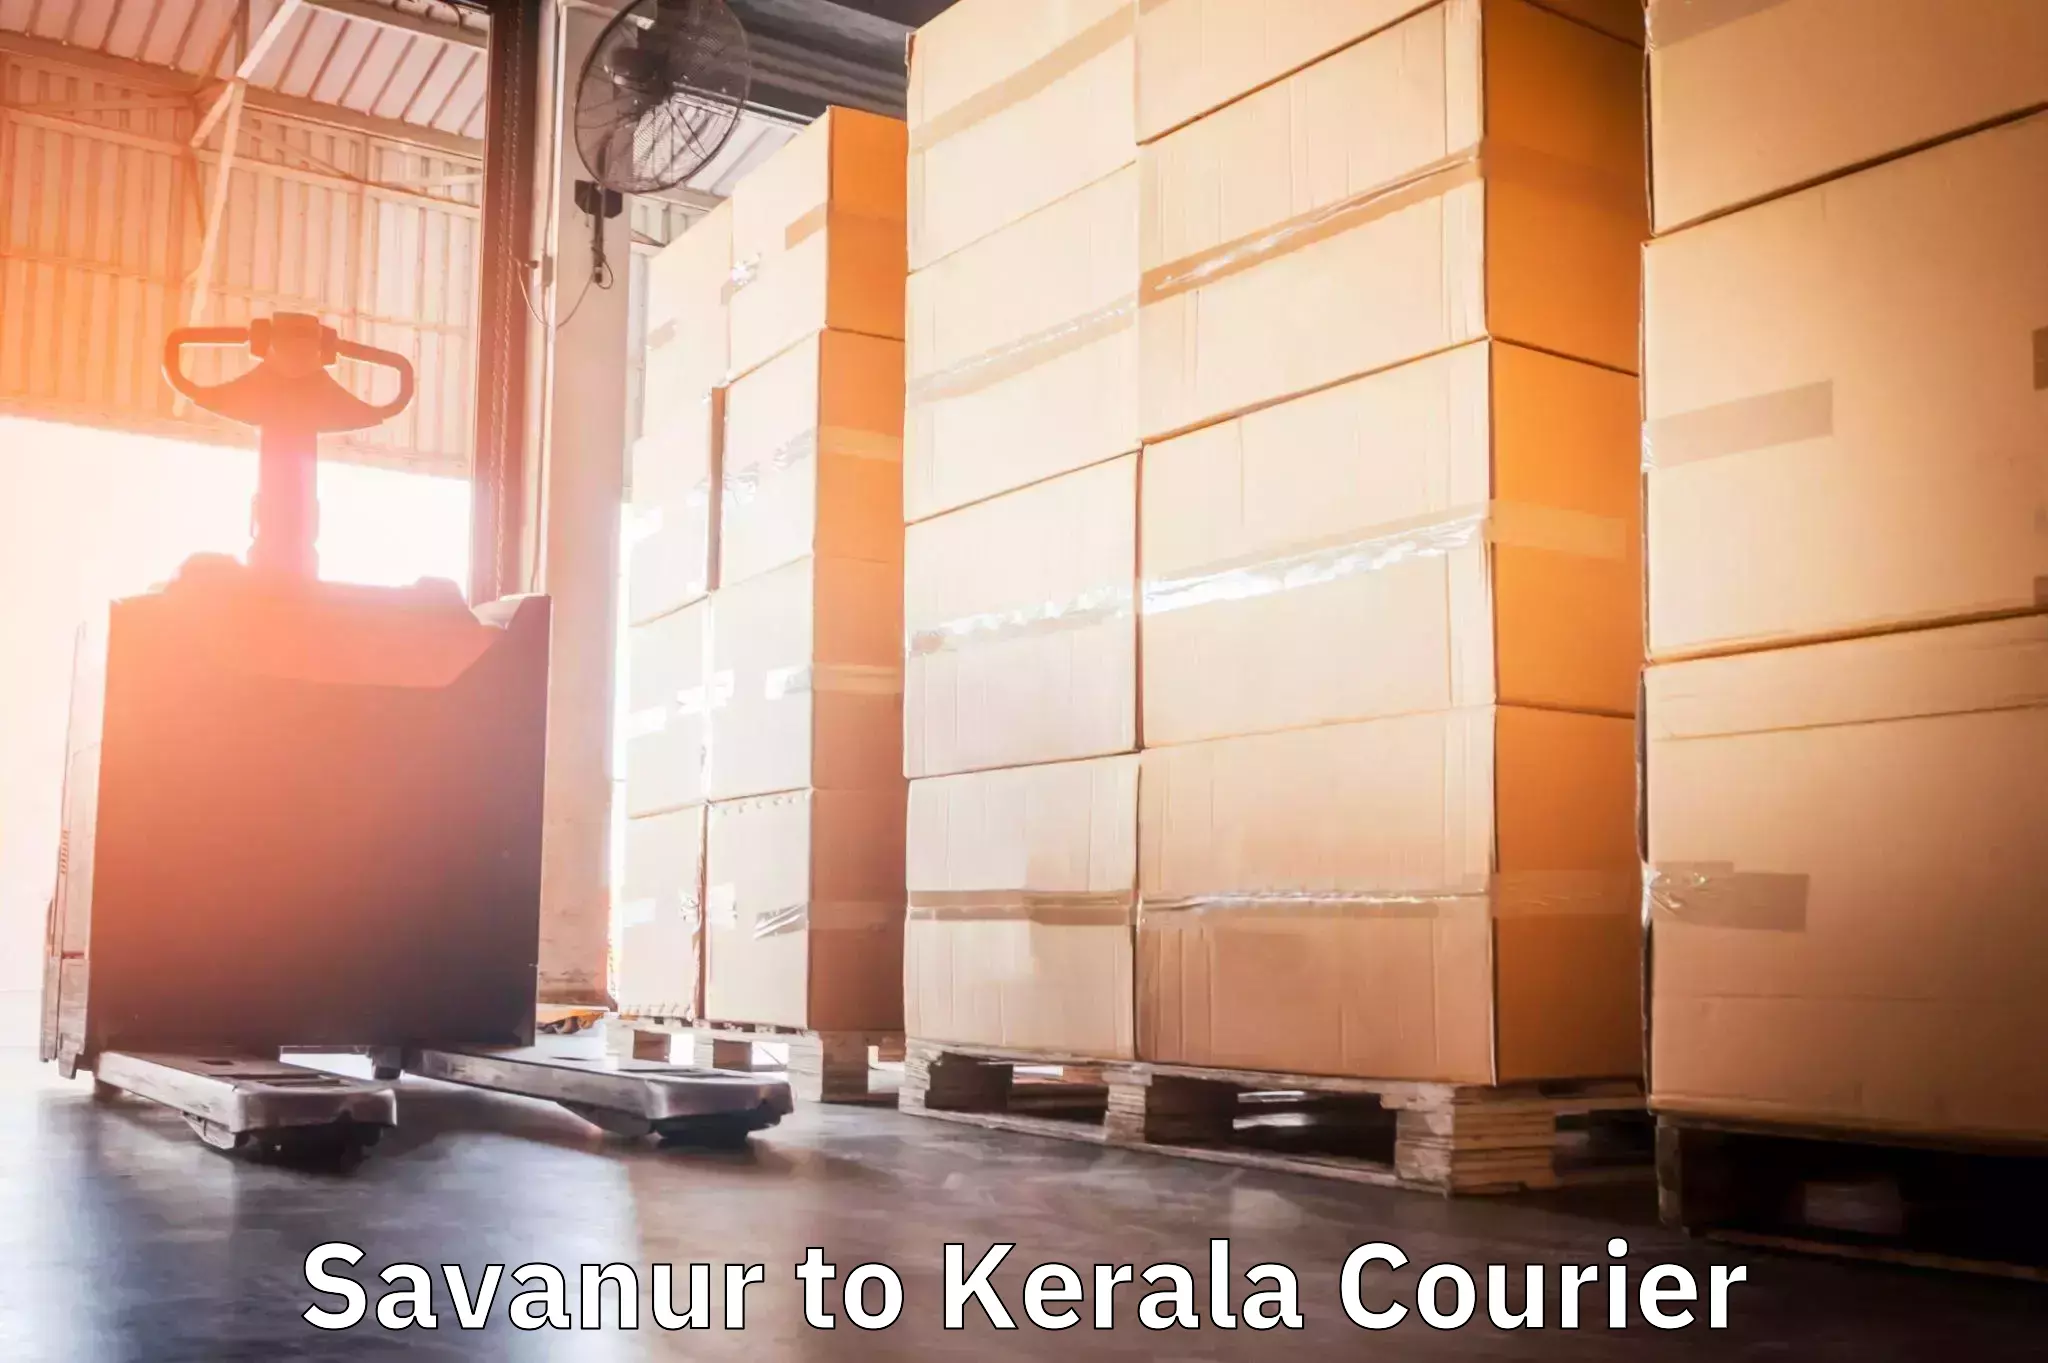 Same-day delivery solutions Savanur to Kerala